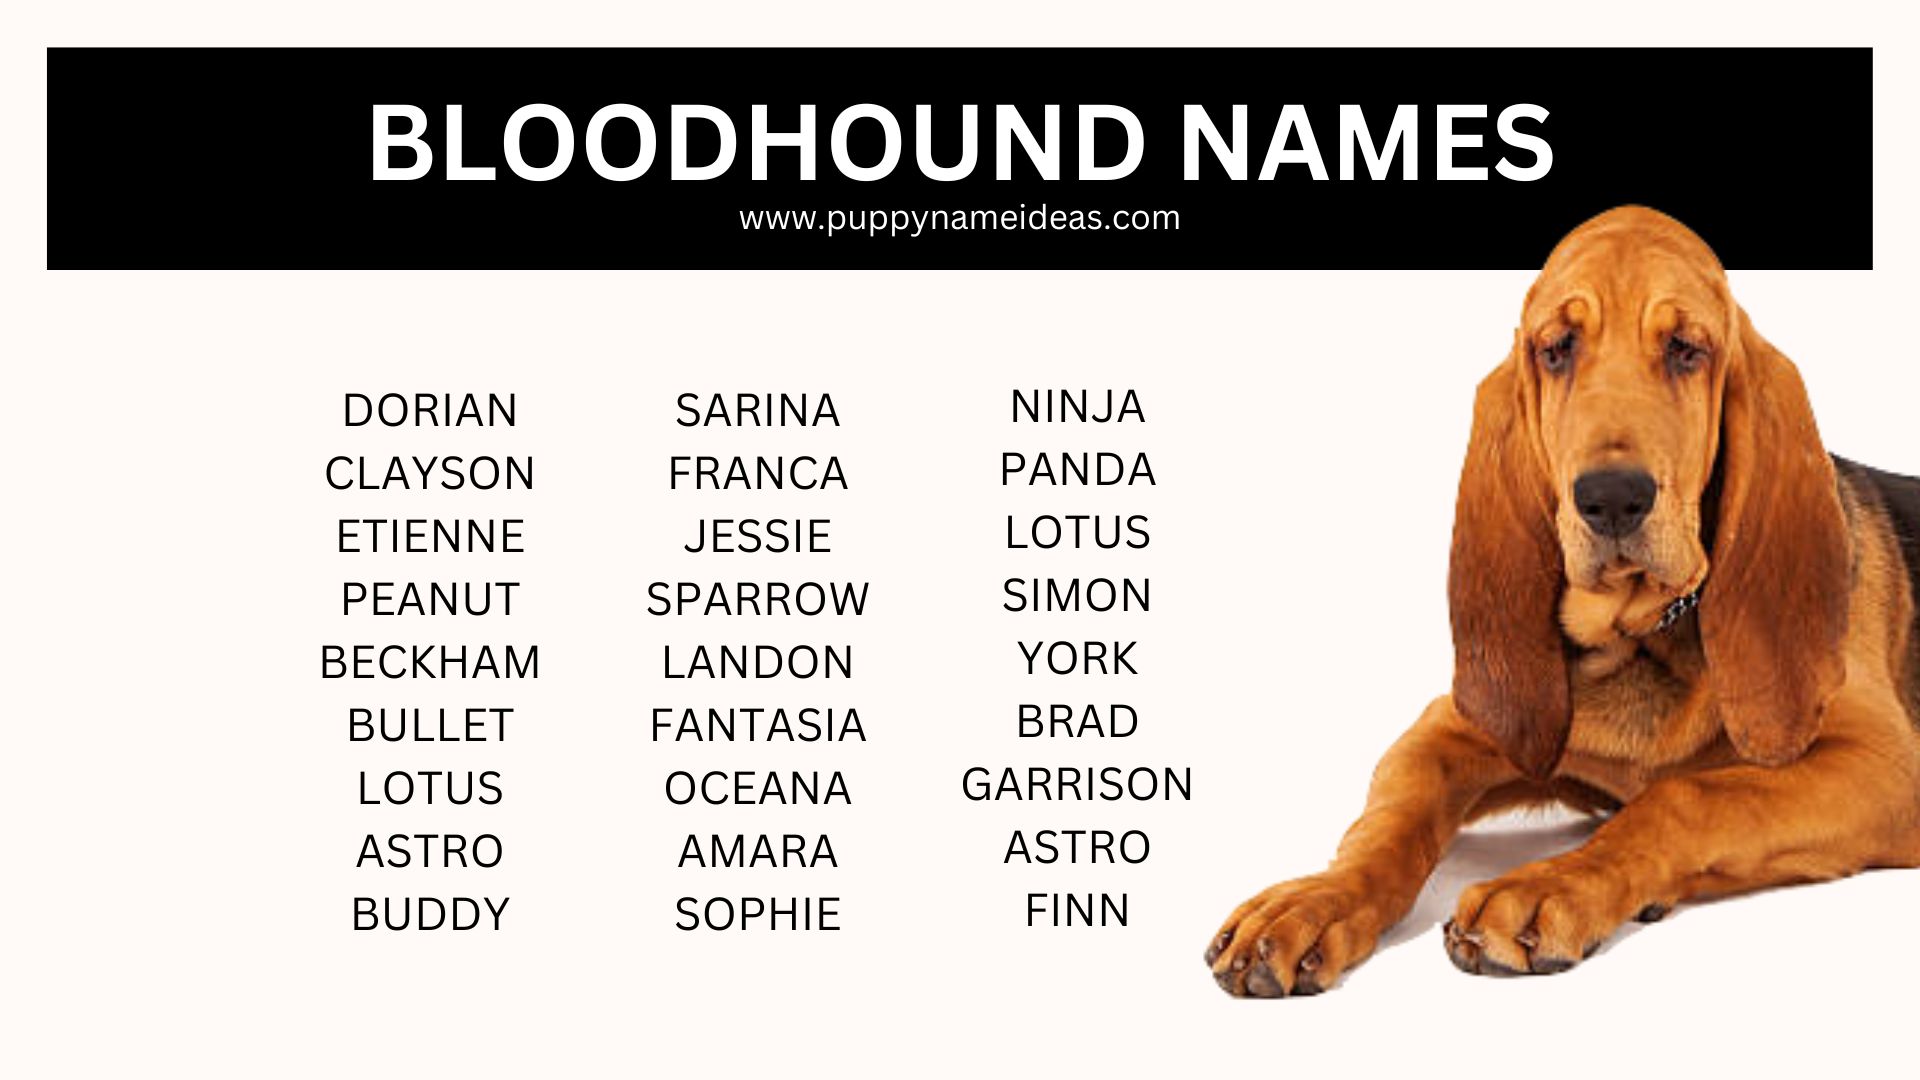 370+ Bloodhound Names (With Meanings)